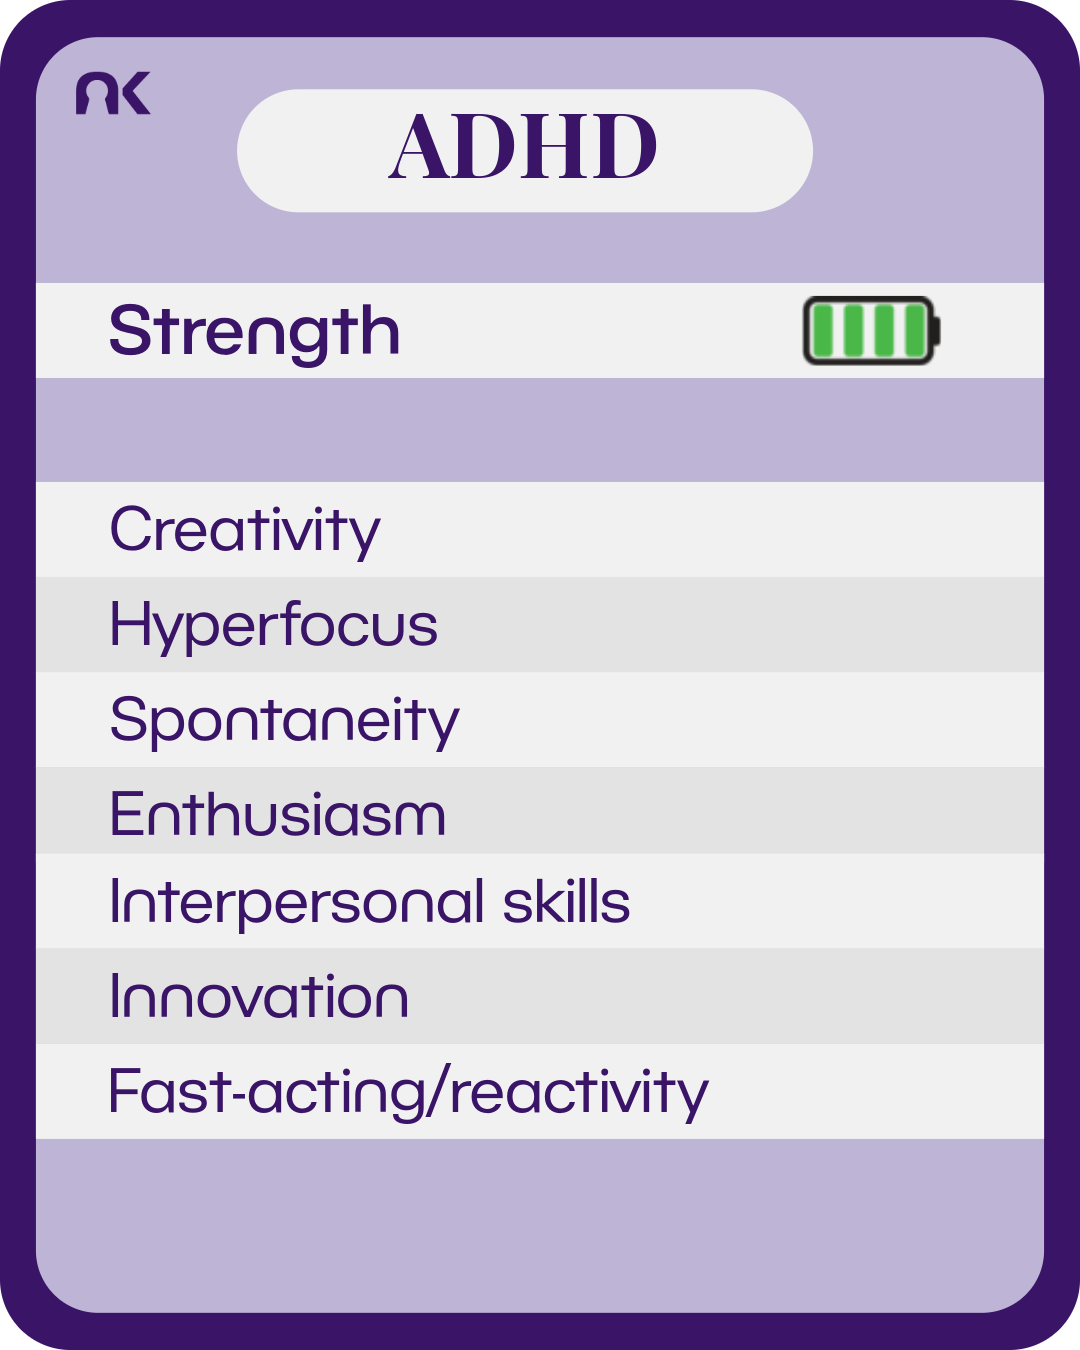 An information card made to look like it is from a card game. Next to the subtitle "strength" is a battery with green bars to show full charge. Text says: "ADHD. Strength. Creativity; Hyperfocus; Spontaneity; Enthusiasm; Interpersonal skills; Innovation; Fast-acting/reactivity."